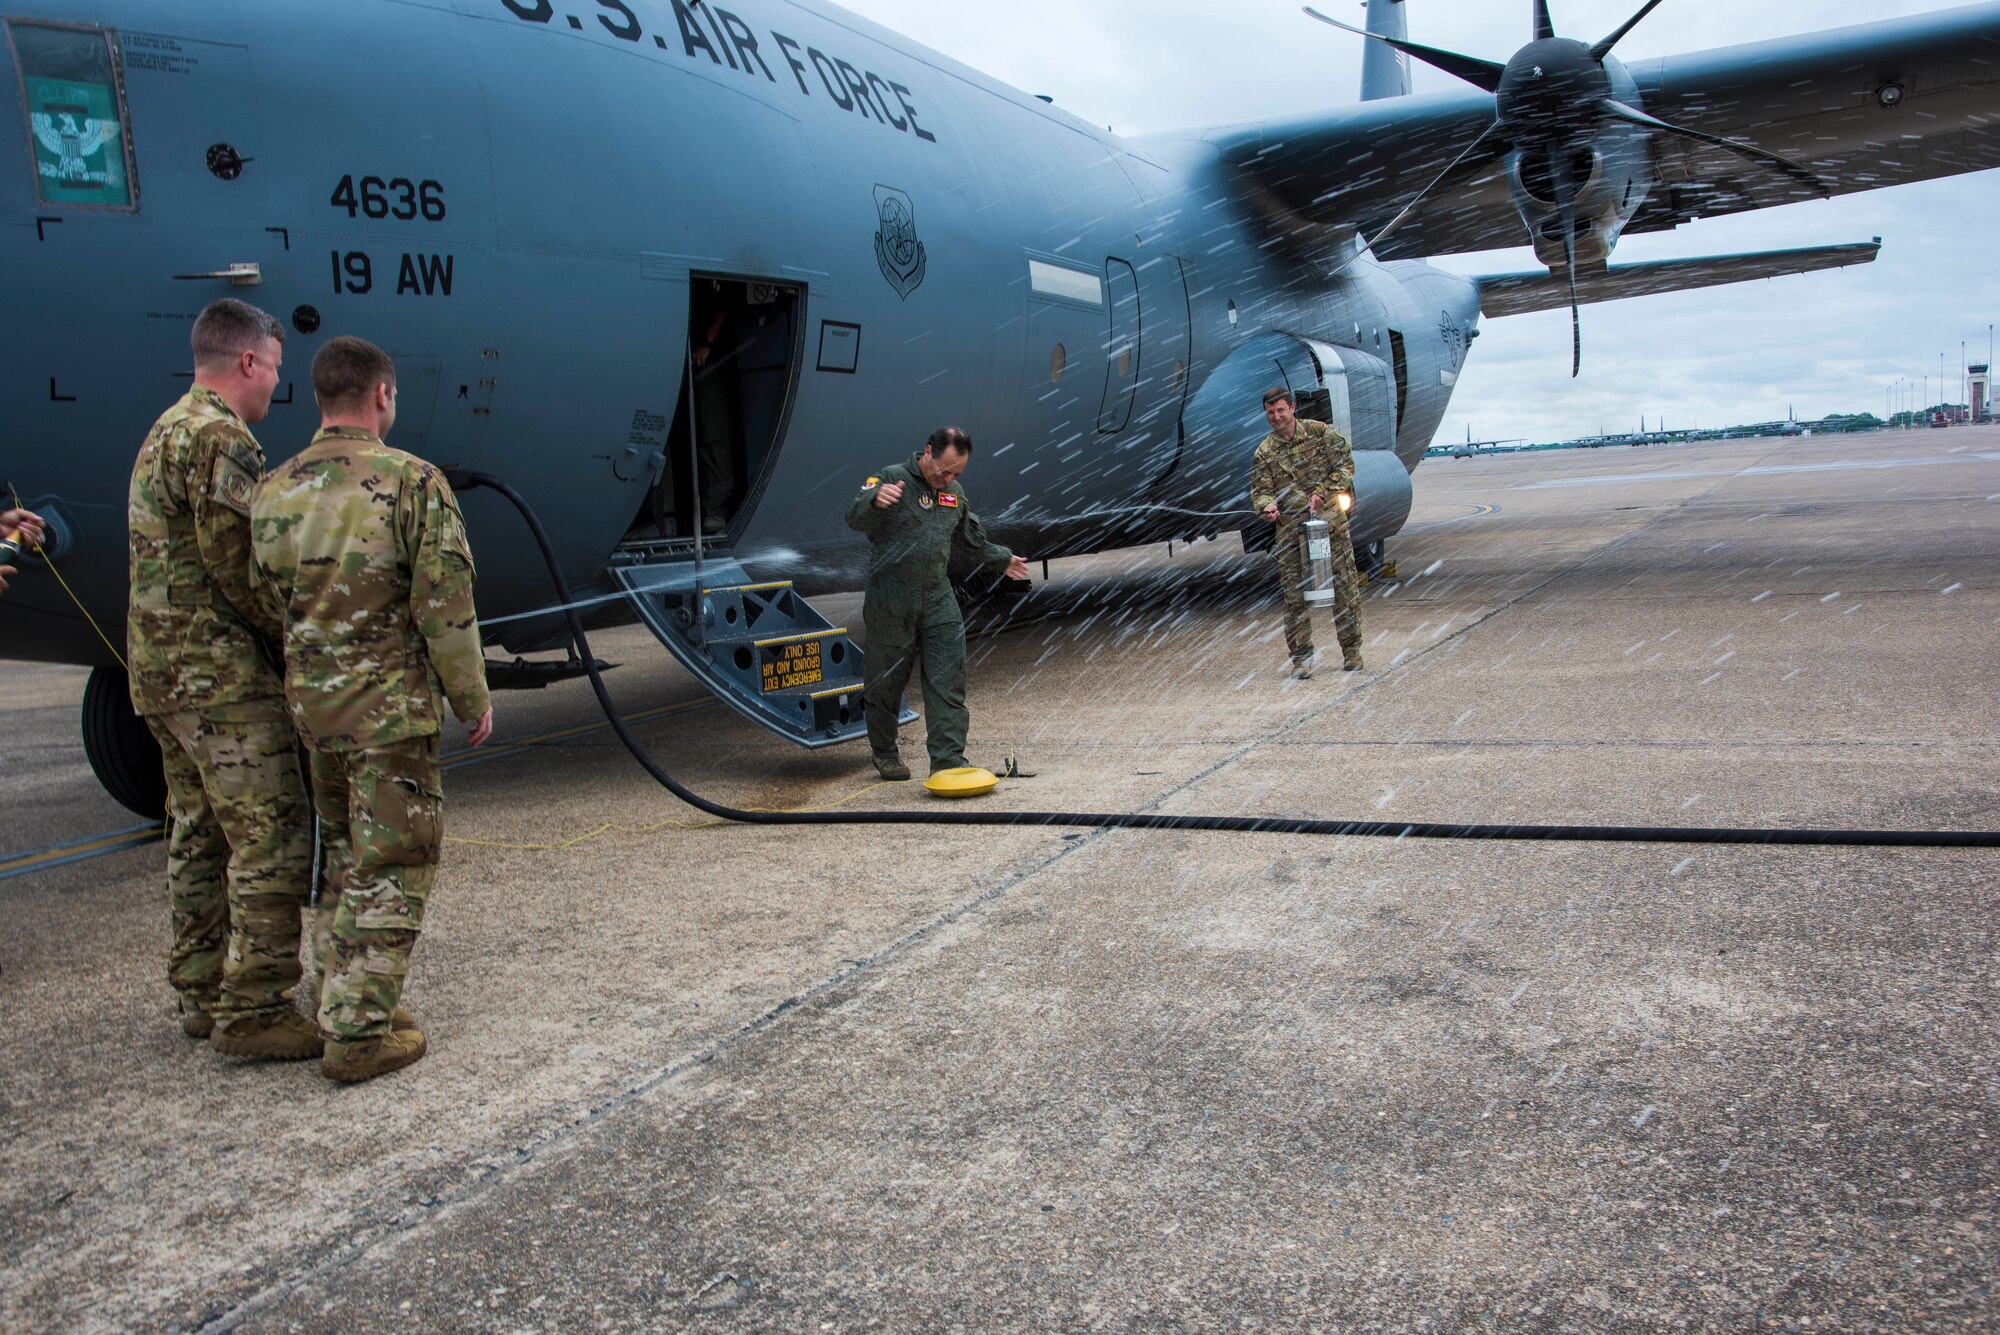 U.S. Air Force Reserve Col. Anthony Brusca, 913th Airlift Group deputy commander, steps off the aircraft to be doused in water after his last flight in the Air Force at Little Rock Air Force Base, Ark. on May 3, 2019